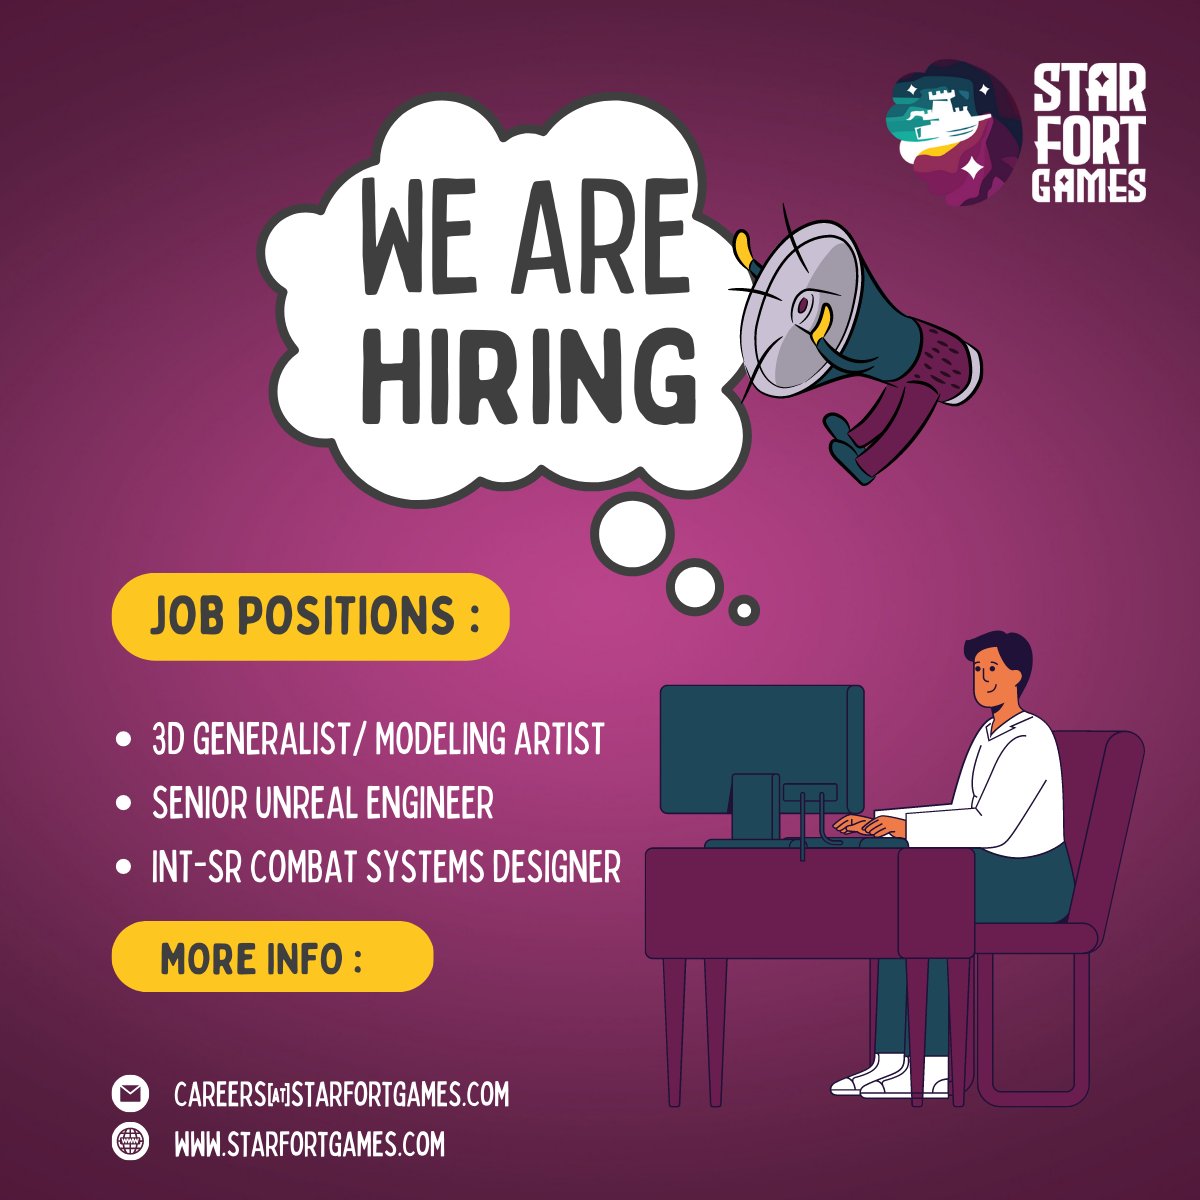 We are hiring, check out our website for details on the roles, don’t see what you are looking for? Send us your resume/portfolio, and we will keep it on file for future opportunities. 
starfortgames.com

#indiejobs #devjobs #designjobs #artjobs #gamedev #indiegames